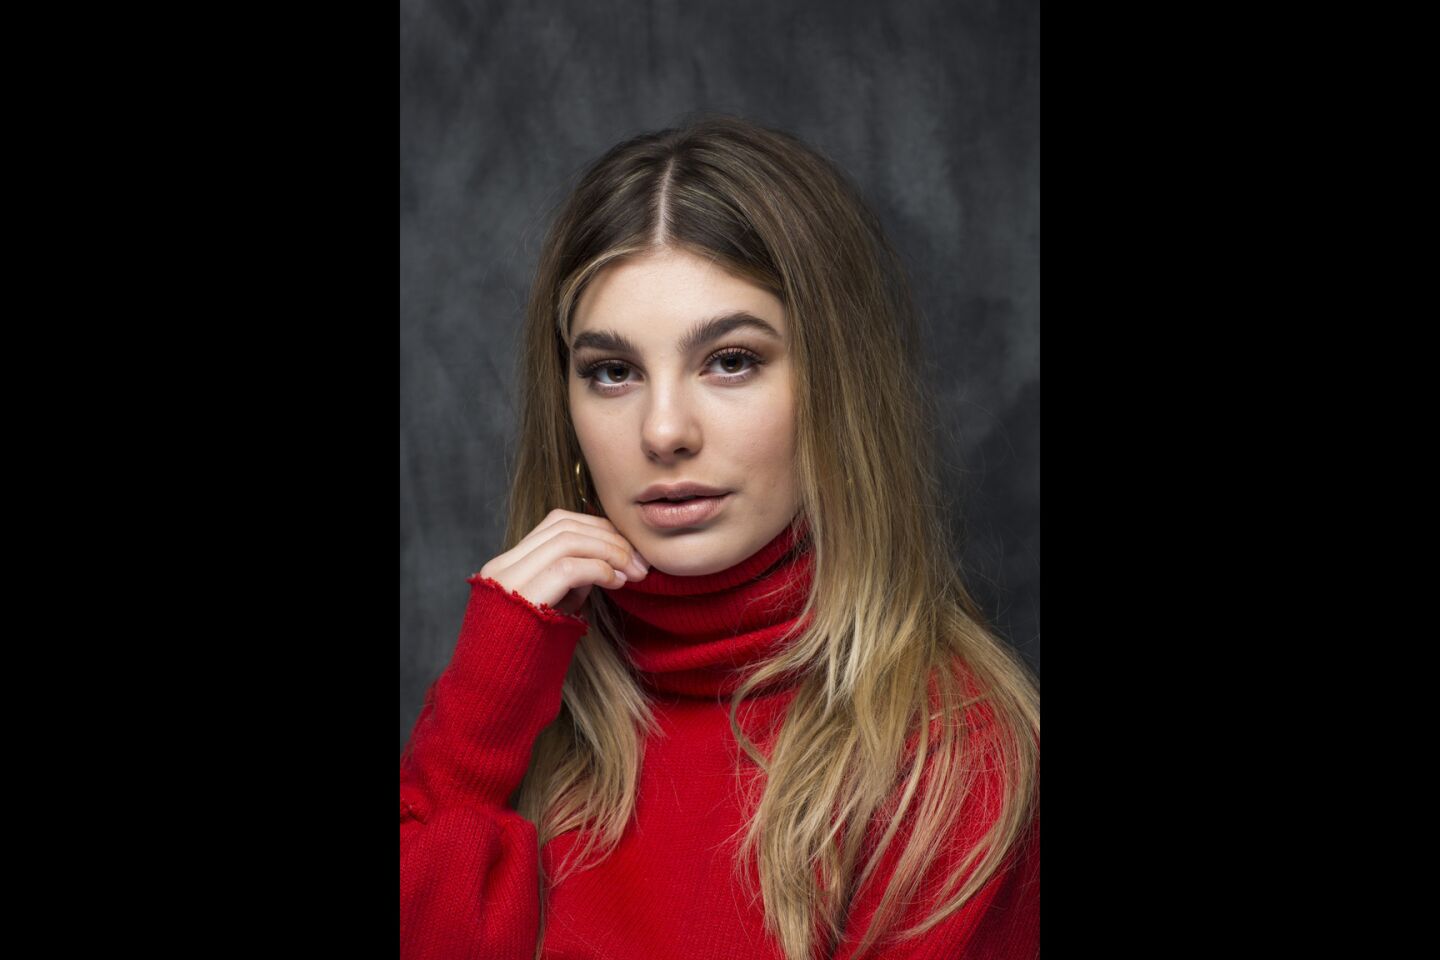 Actress Cami Morrone, from the film "Never Goin' Back."